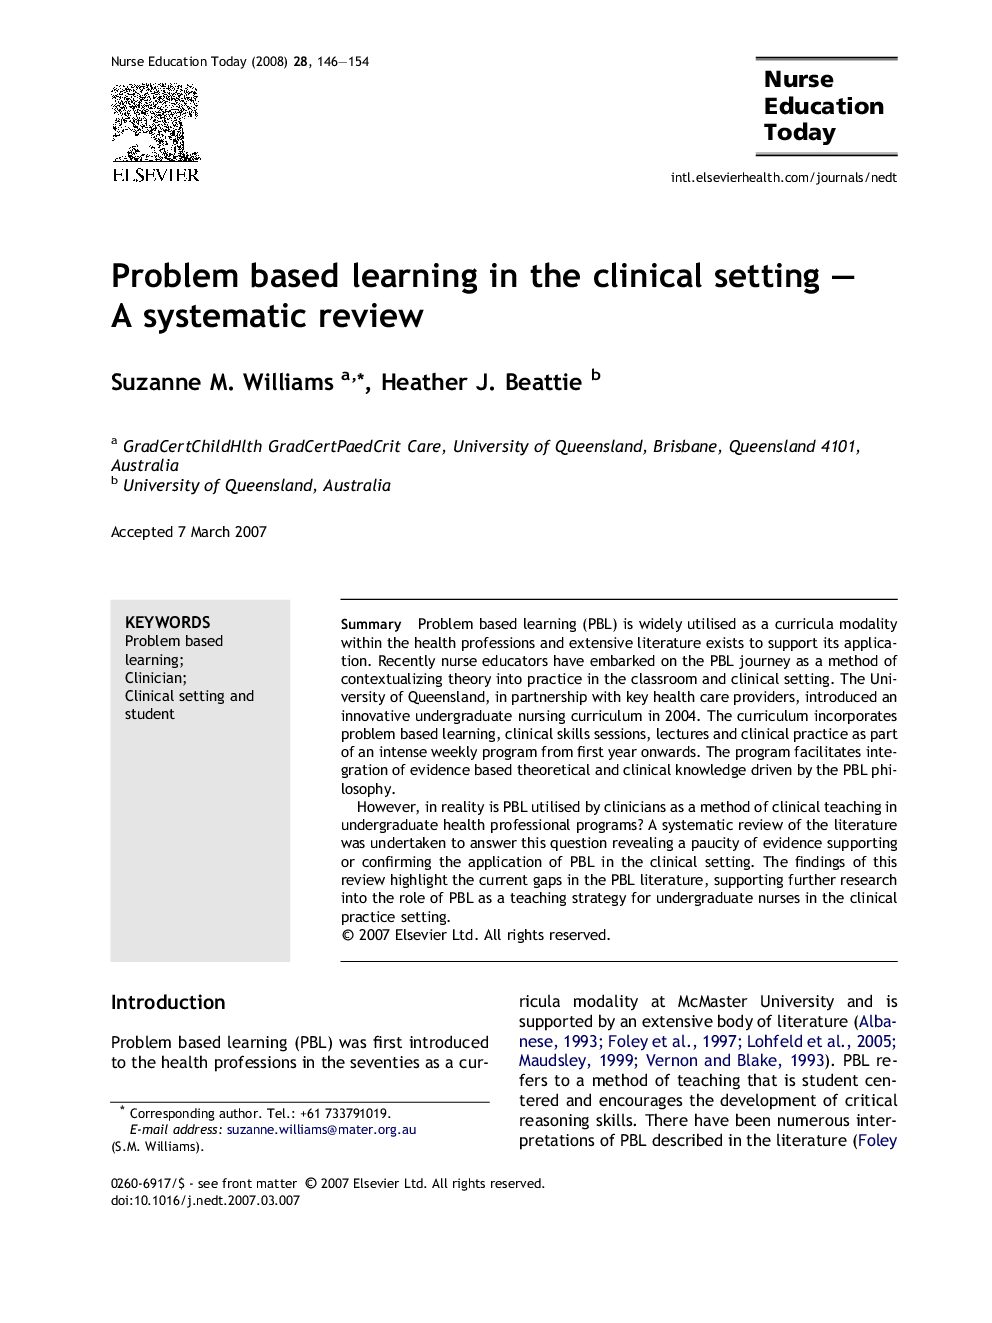 Problem based learning in the clinical setting – A systematic review